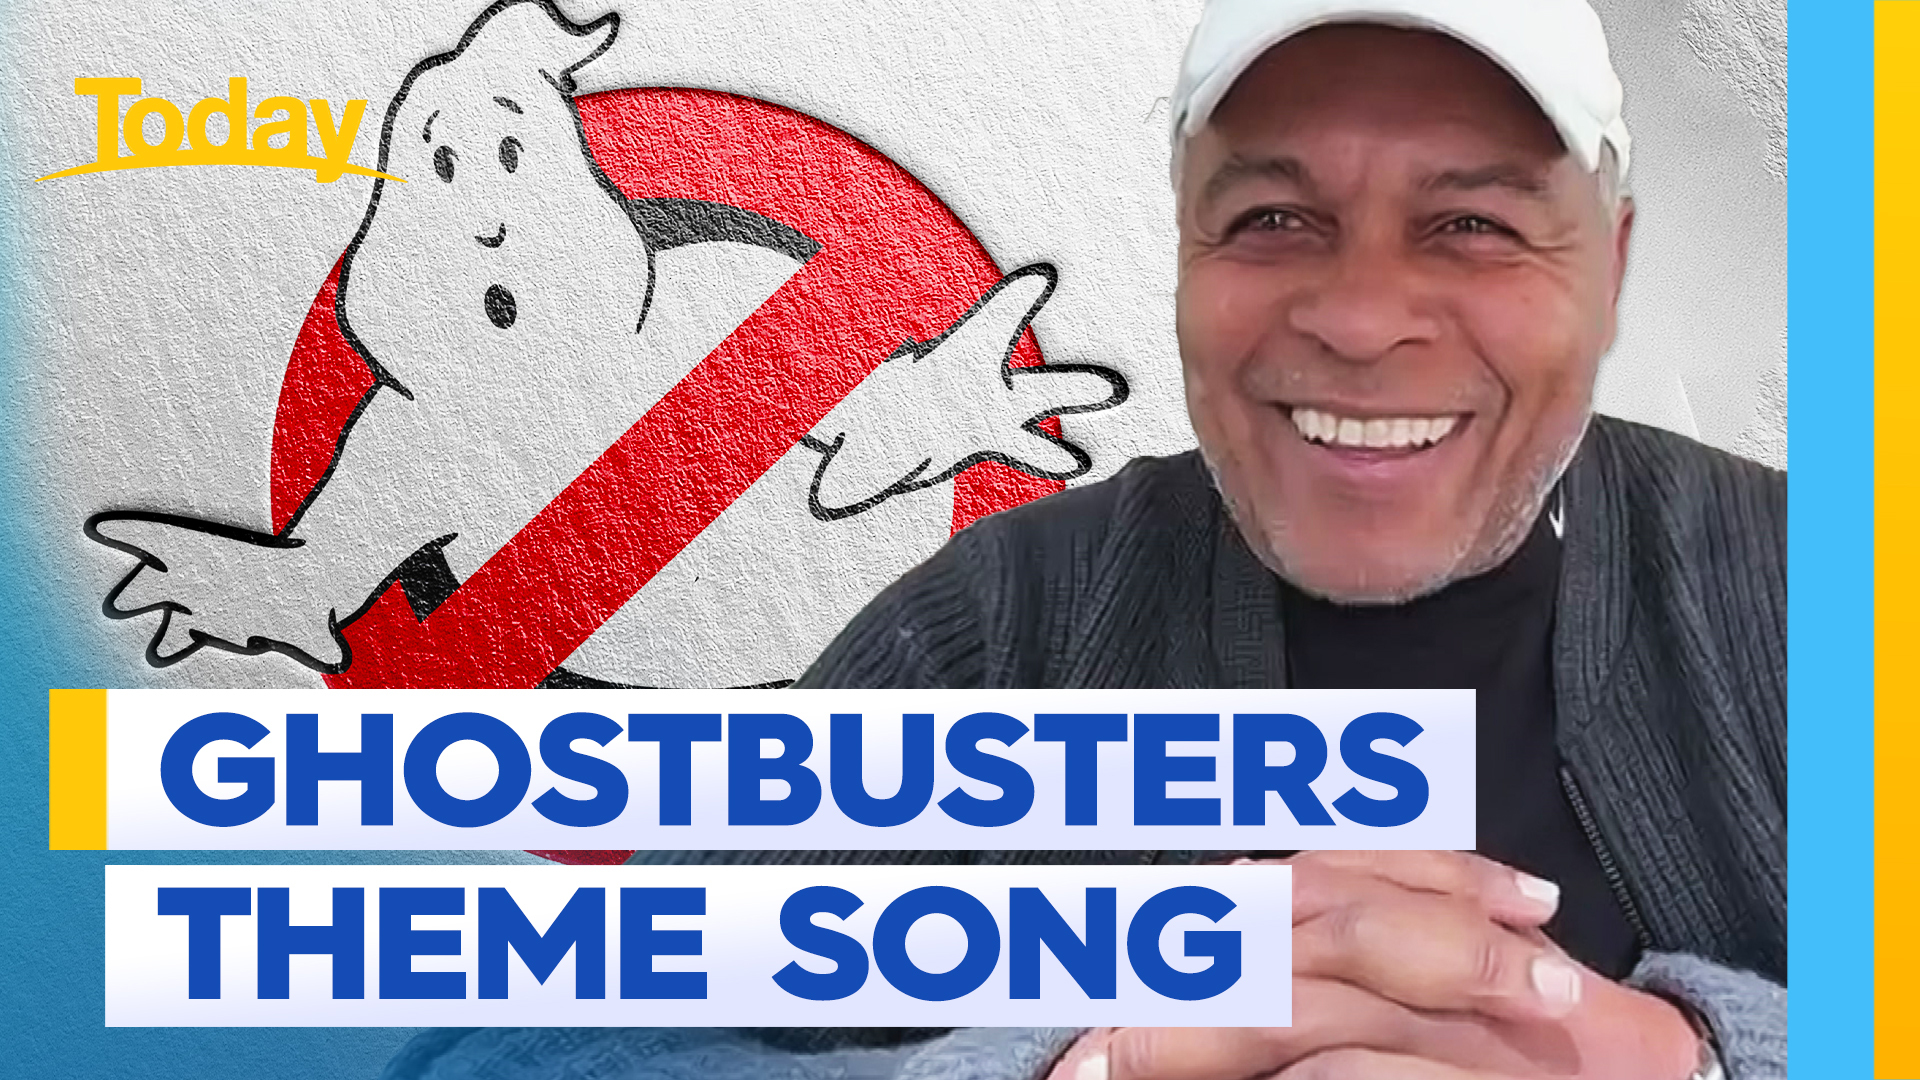 Ghostbusters theme song celebrates 40 years